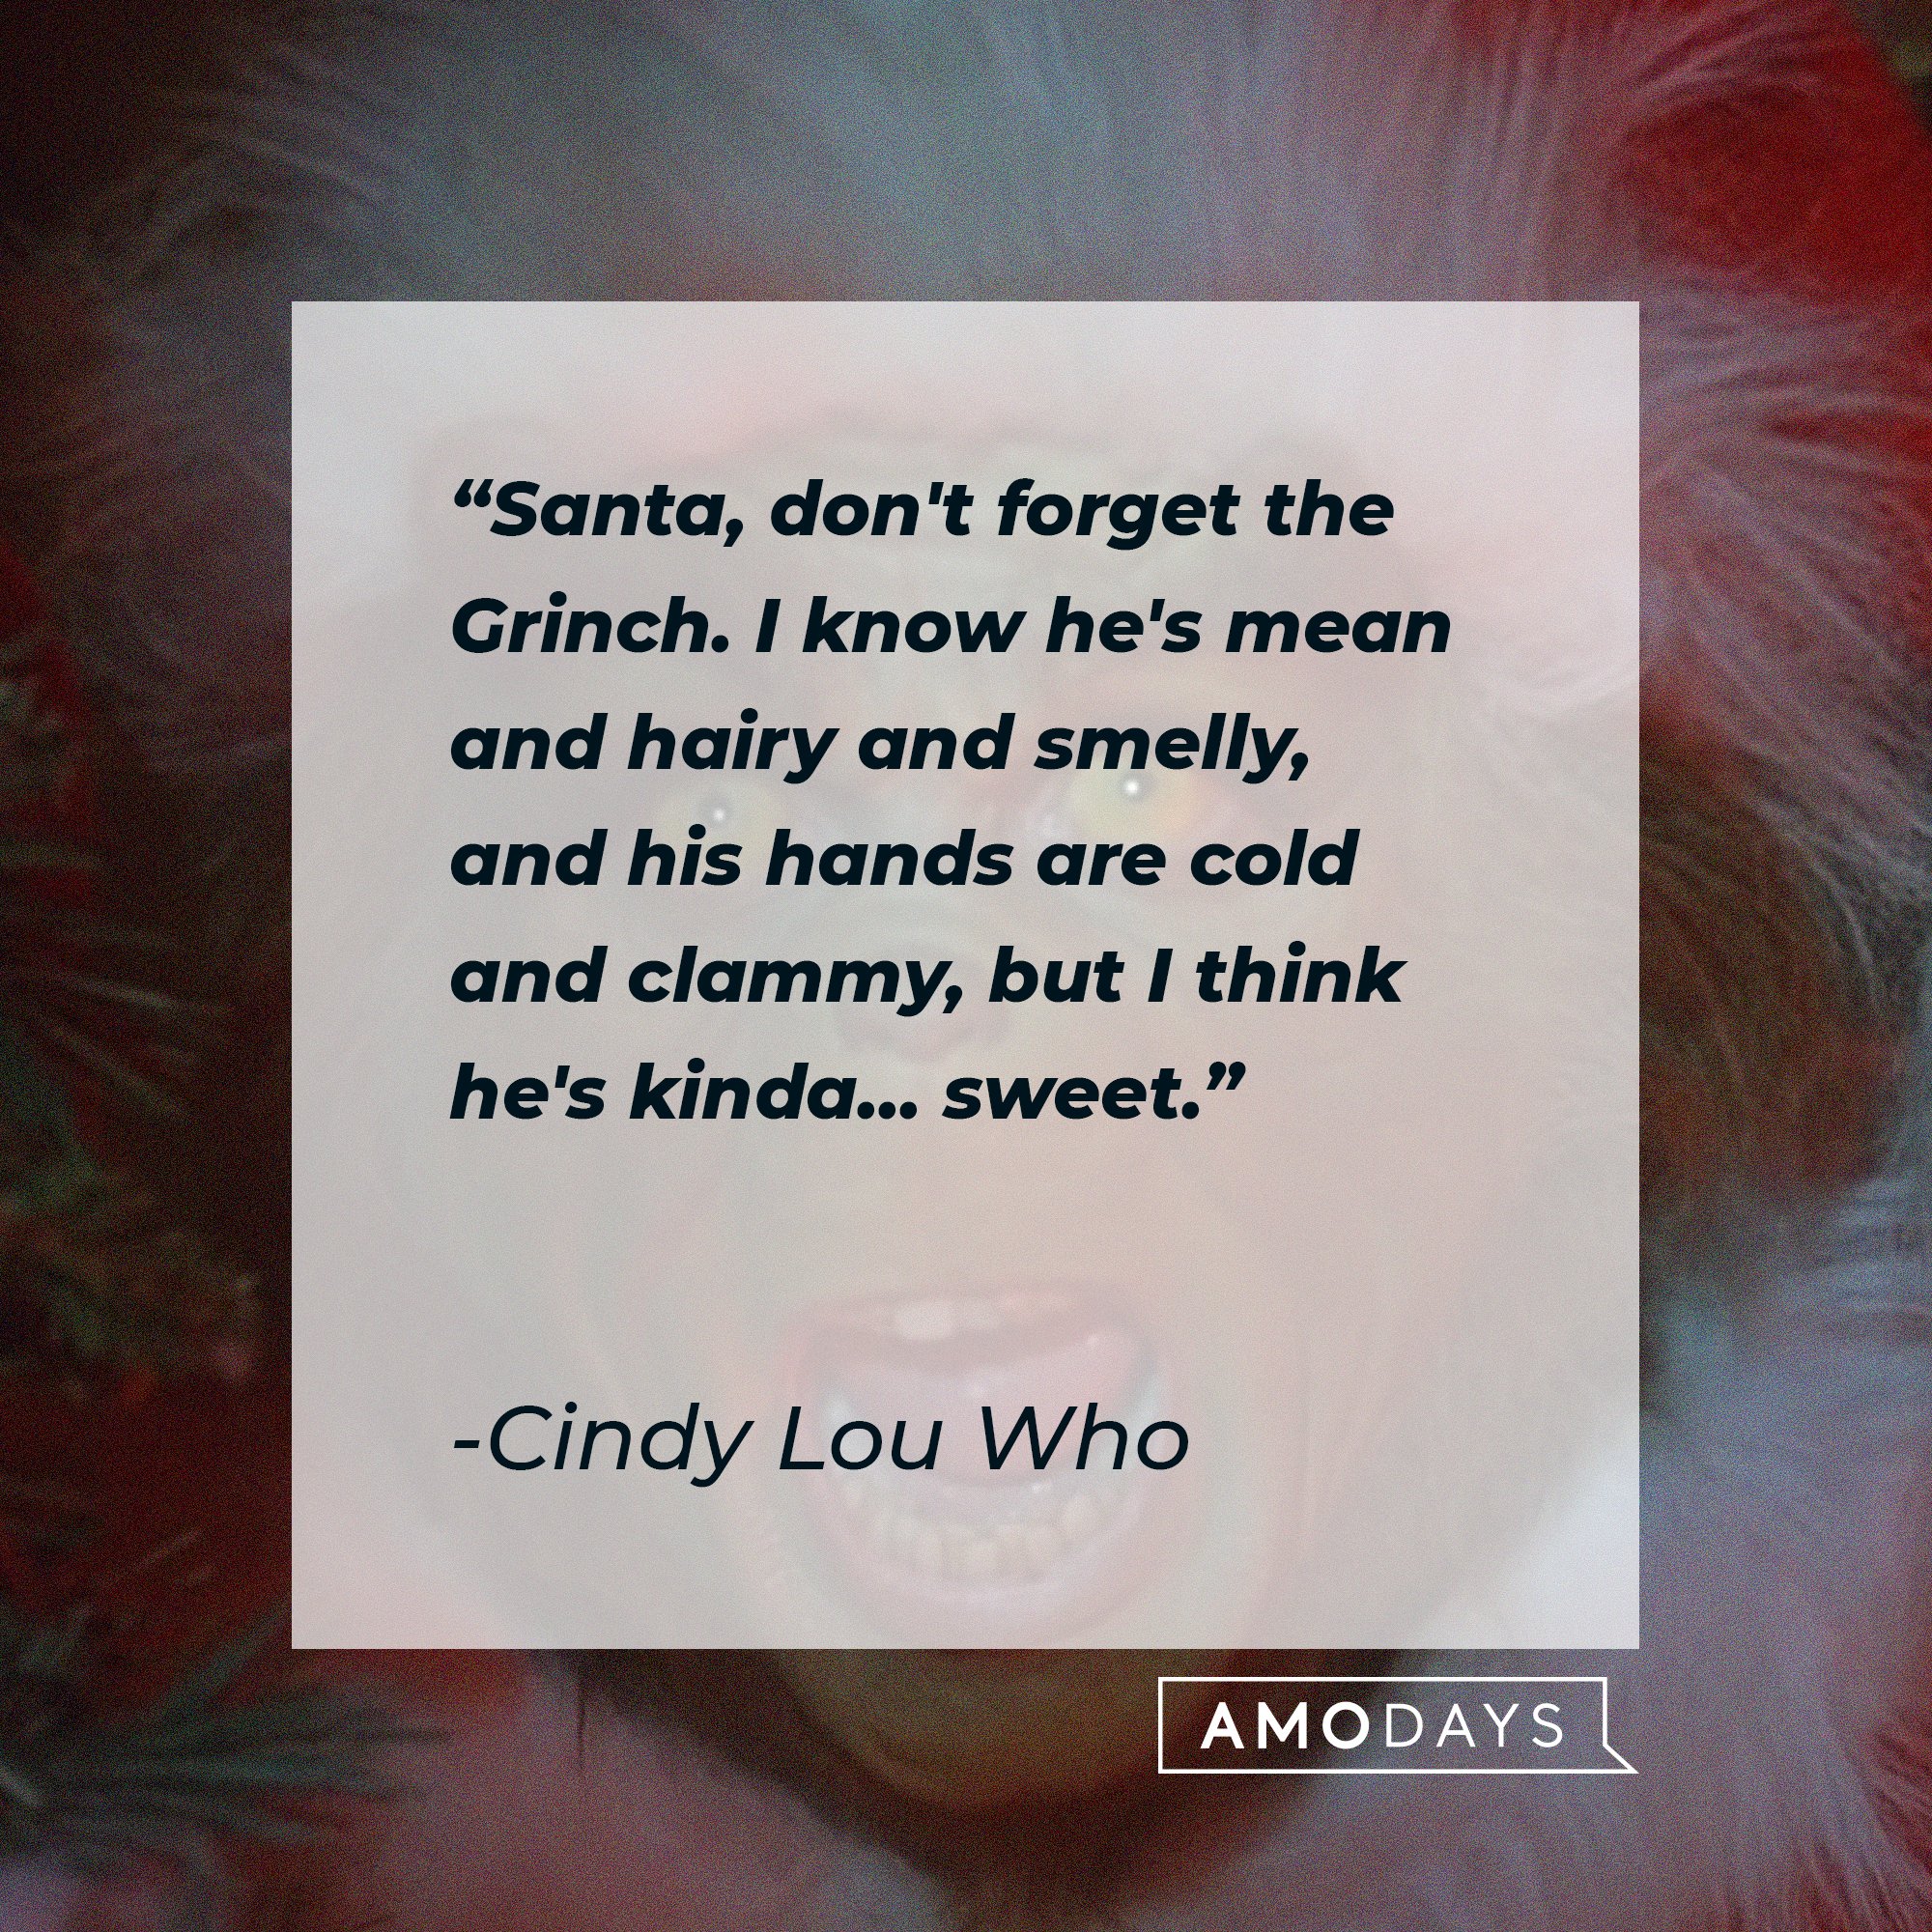 Cindy Lou Who’s quote: quote: "Santa, don't forget the Grinch. I know he's mean and hairy and smelly, and his hands are cold and clammy, but I think he's kinda... sweet." | Image: AmoDays